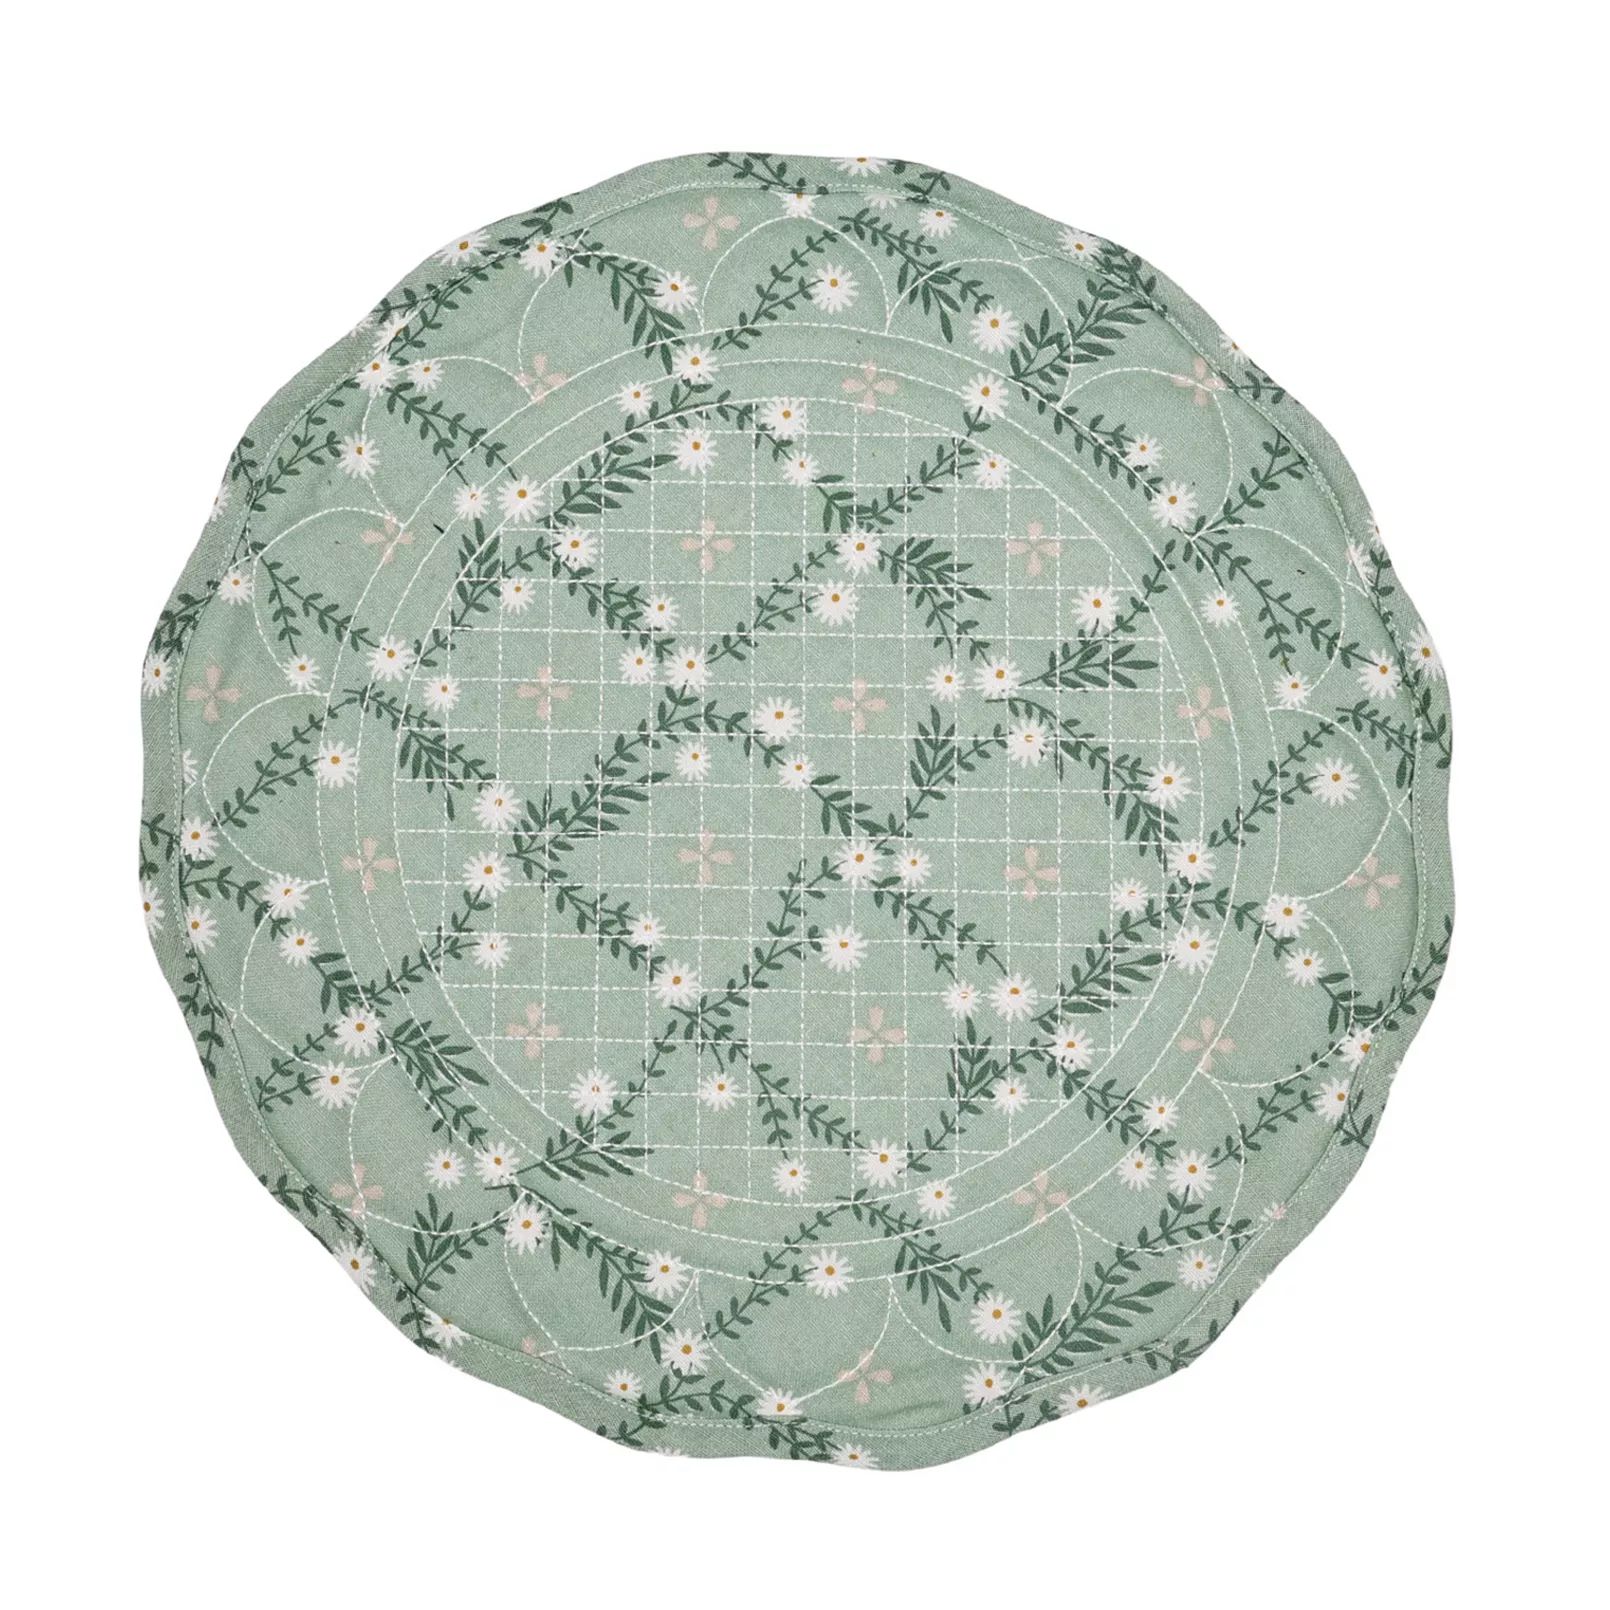 Celebrate Together™ Spring Reversible Quilted Placemat | Kohl's